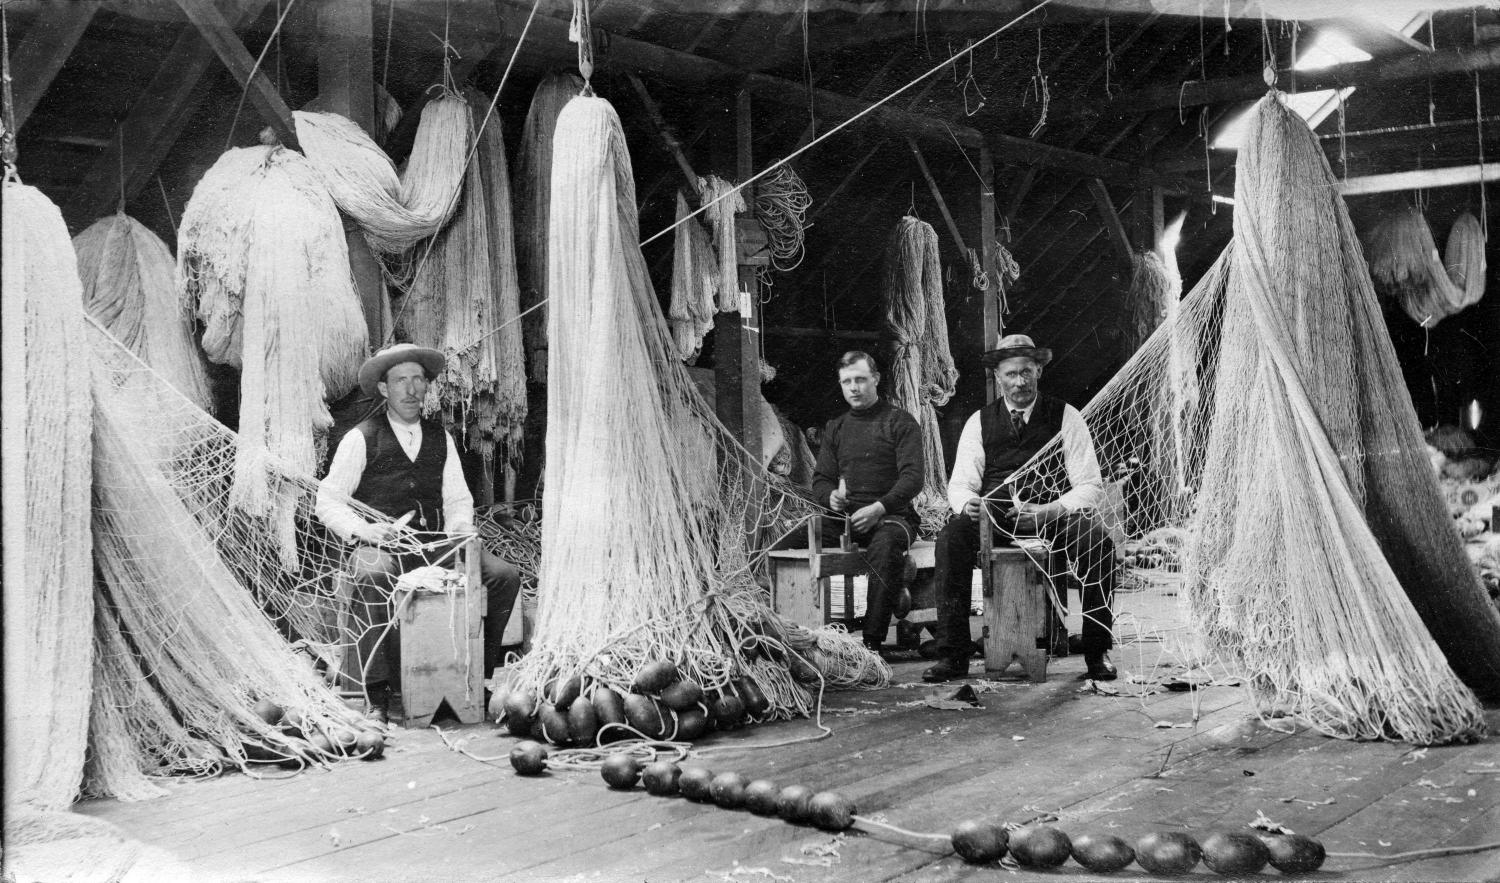 North Pacific Cannery, showing men repairing fishing nets